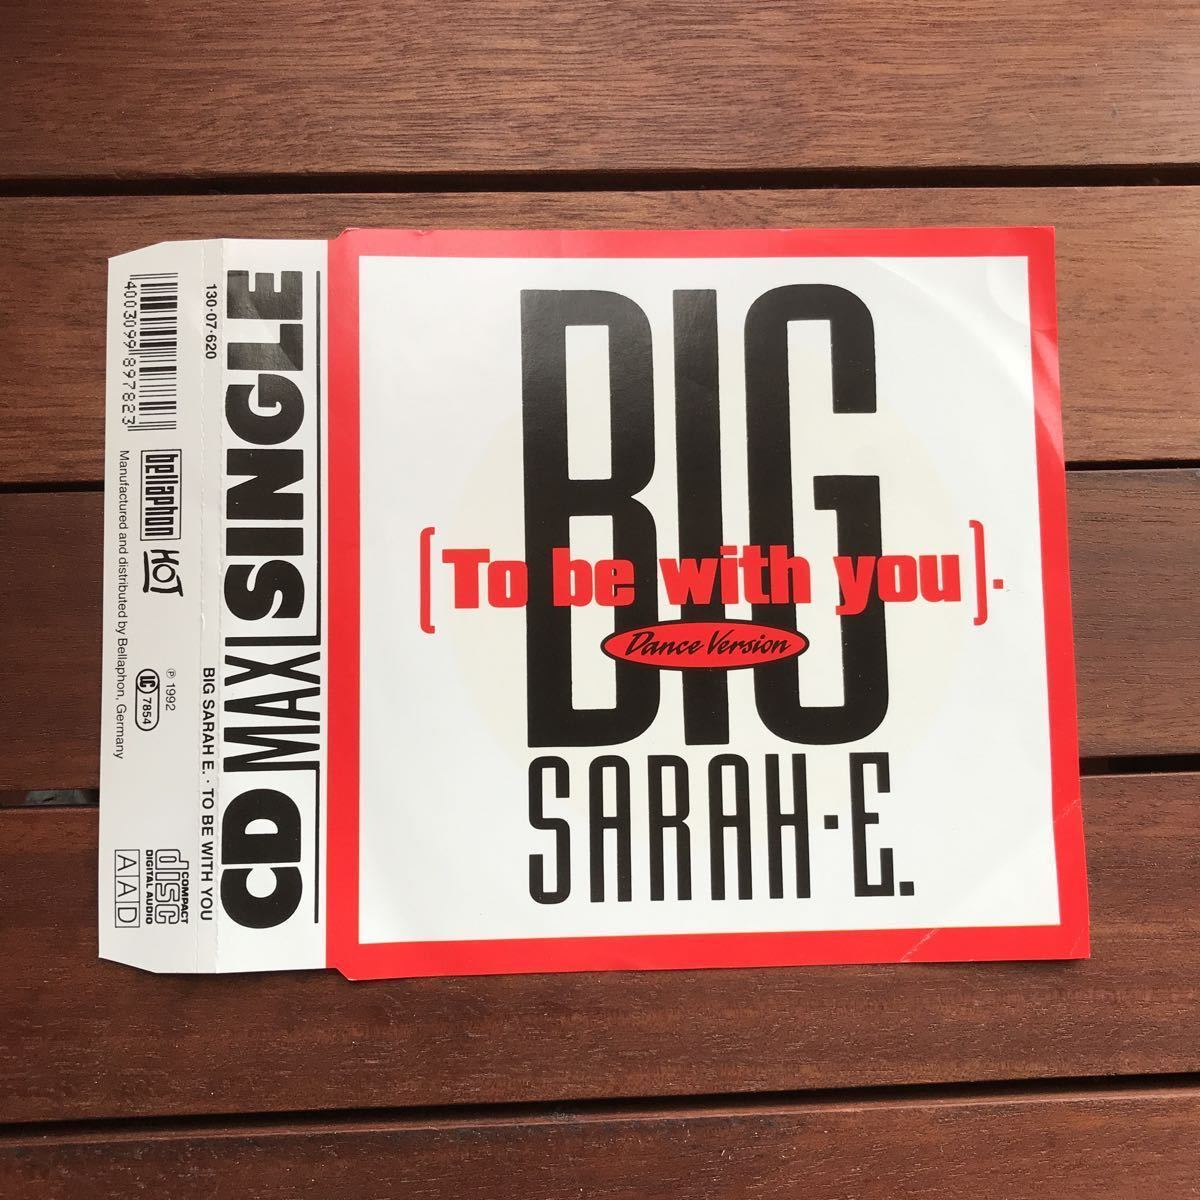 【r&b】Big Sarah-E. / To Be With You (Dance Version) ［CDs］groundbeat_cover song《5b024 9595》_画像1